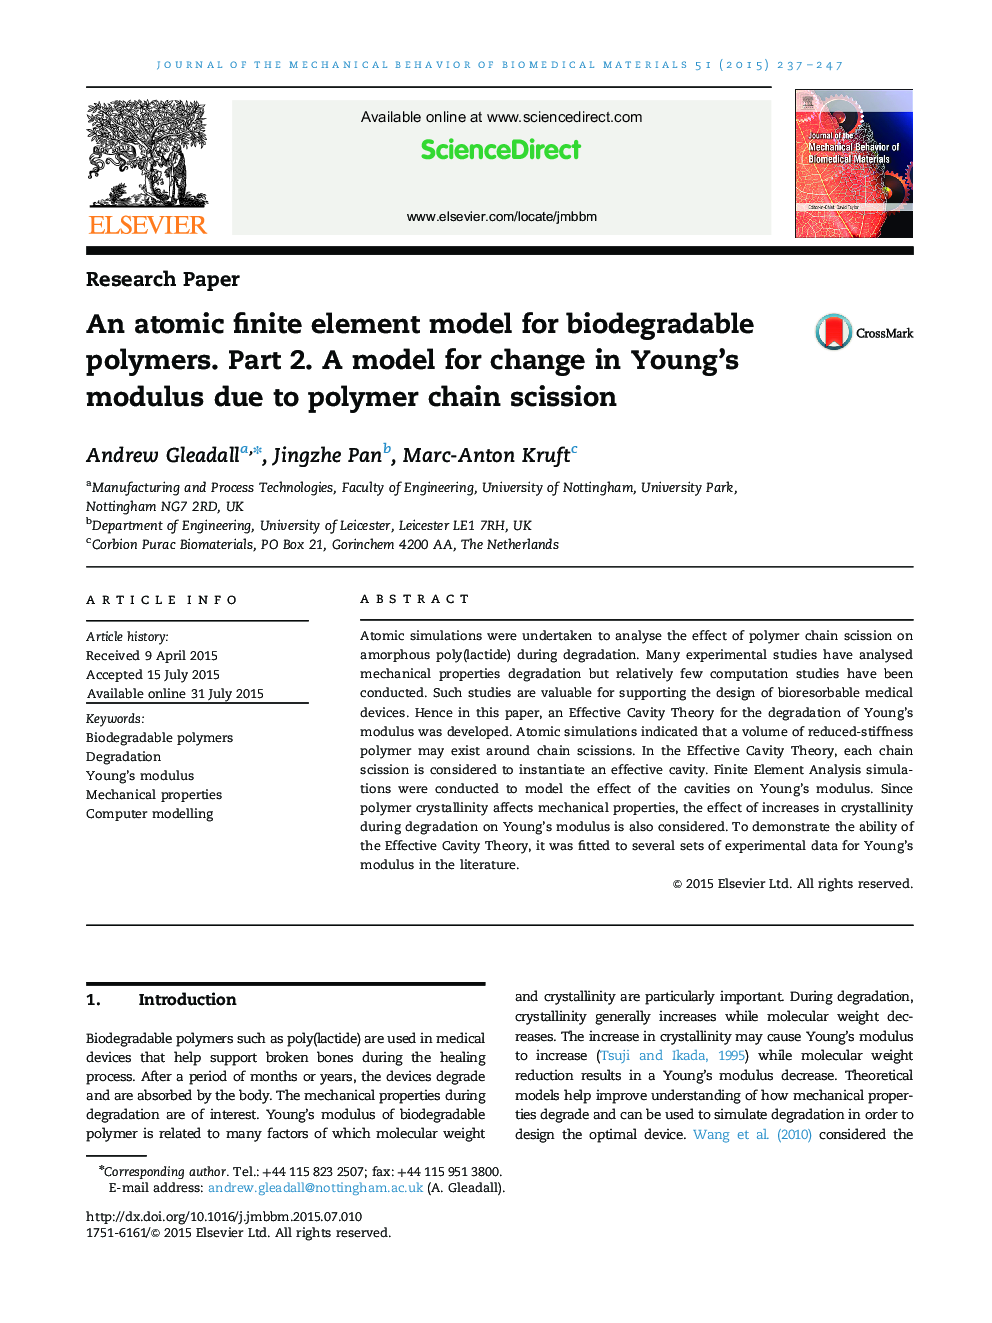 An atomic finite element model for biodegradable polymers. Part 2. A model for change in Young’s modulus due to polymer chain scission